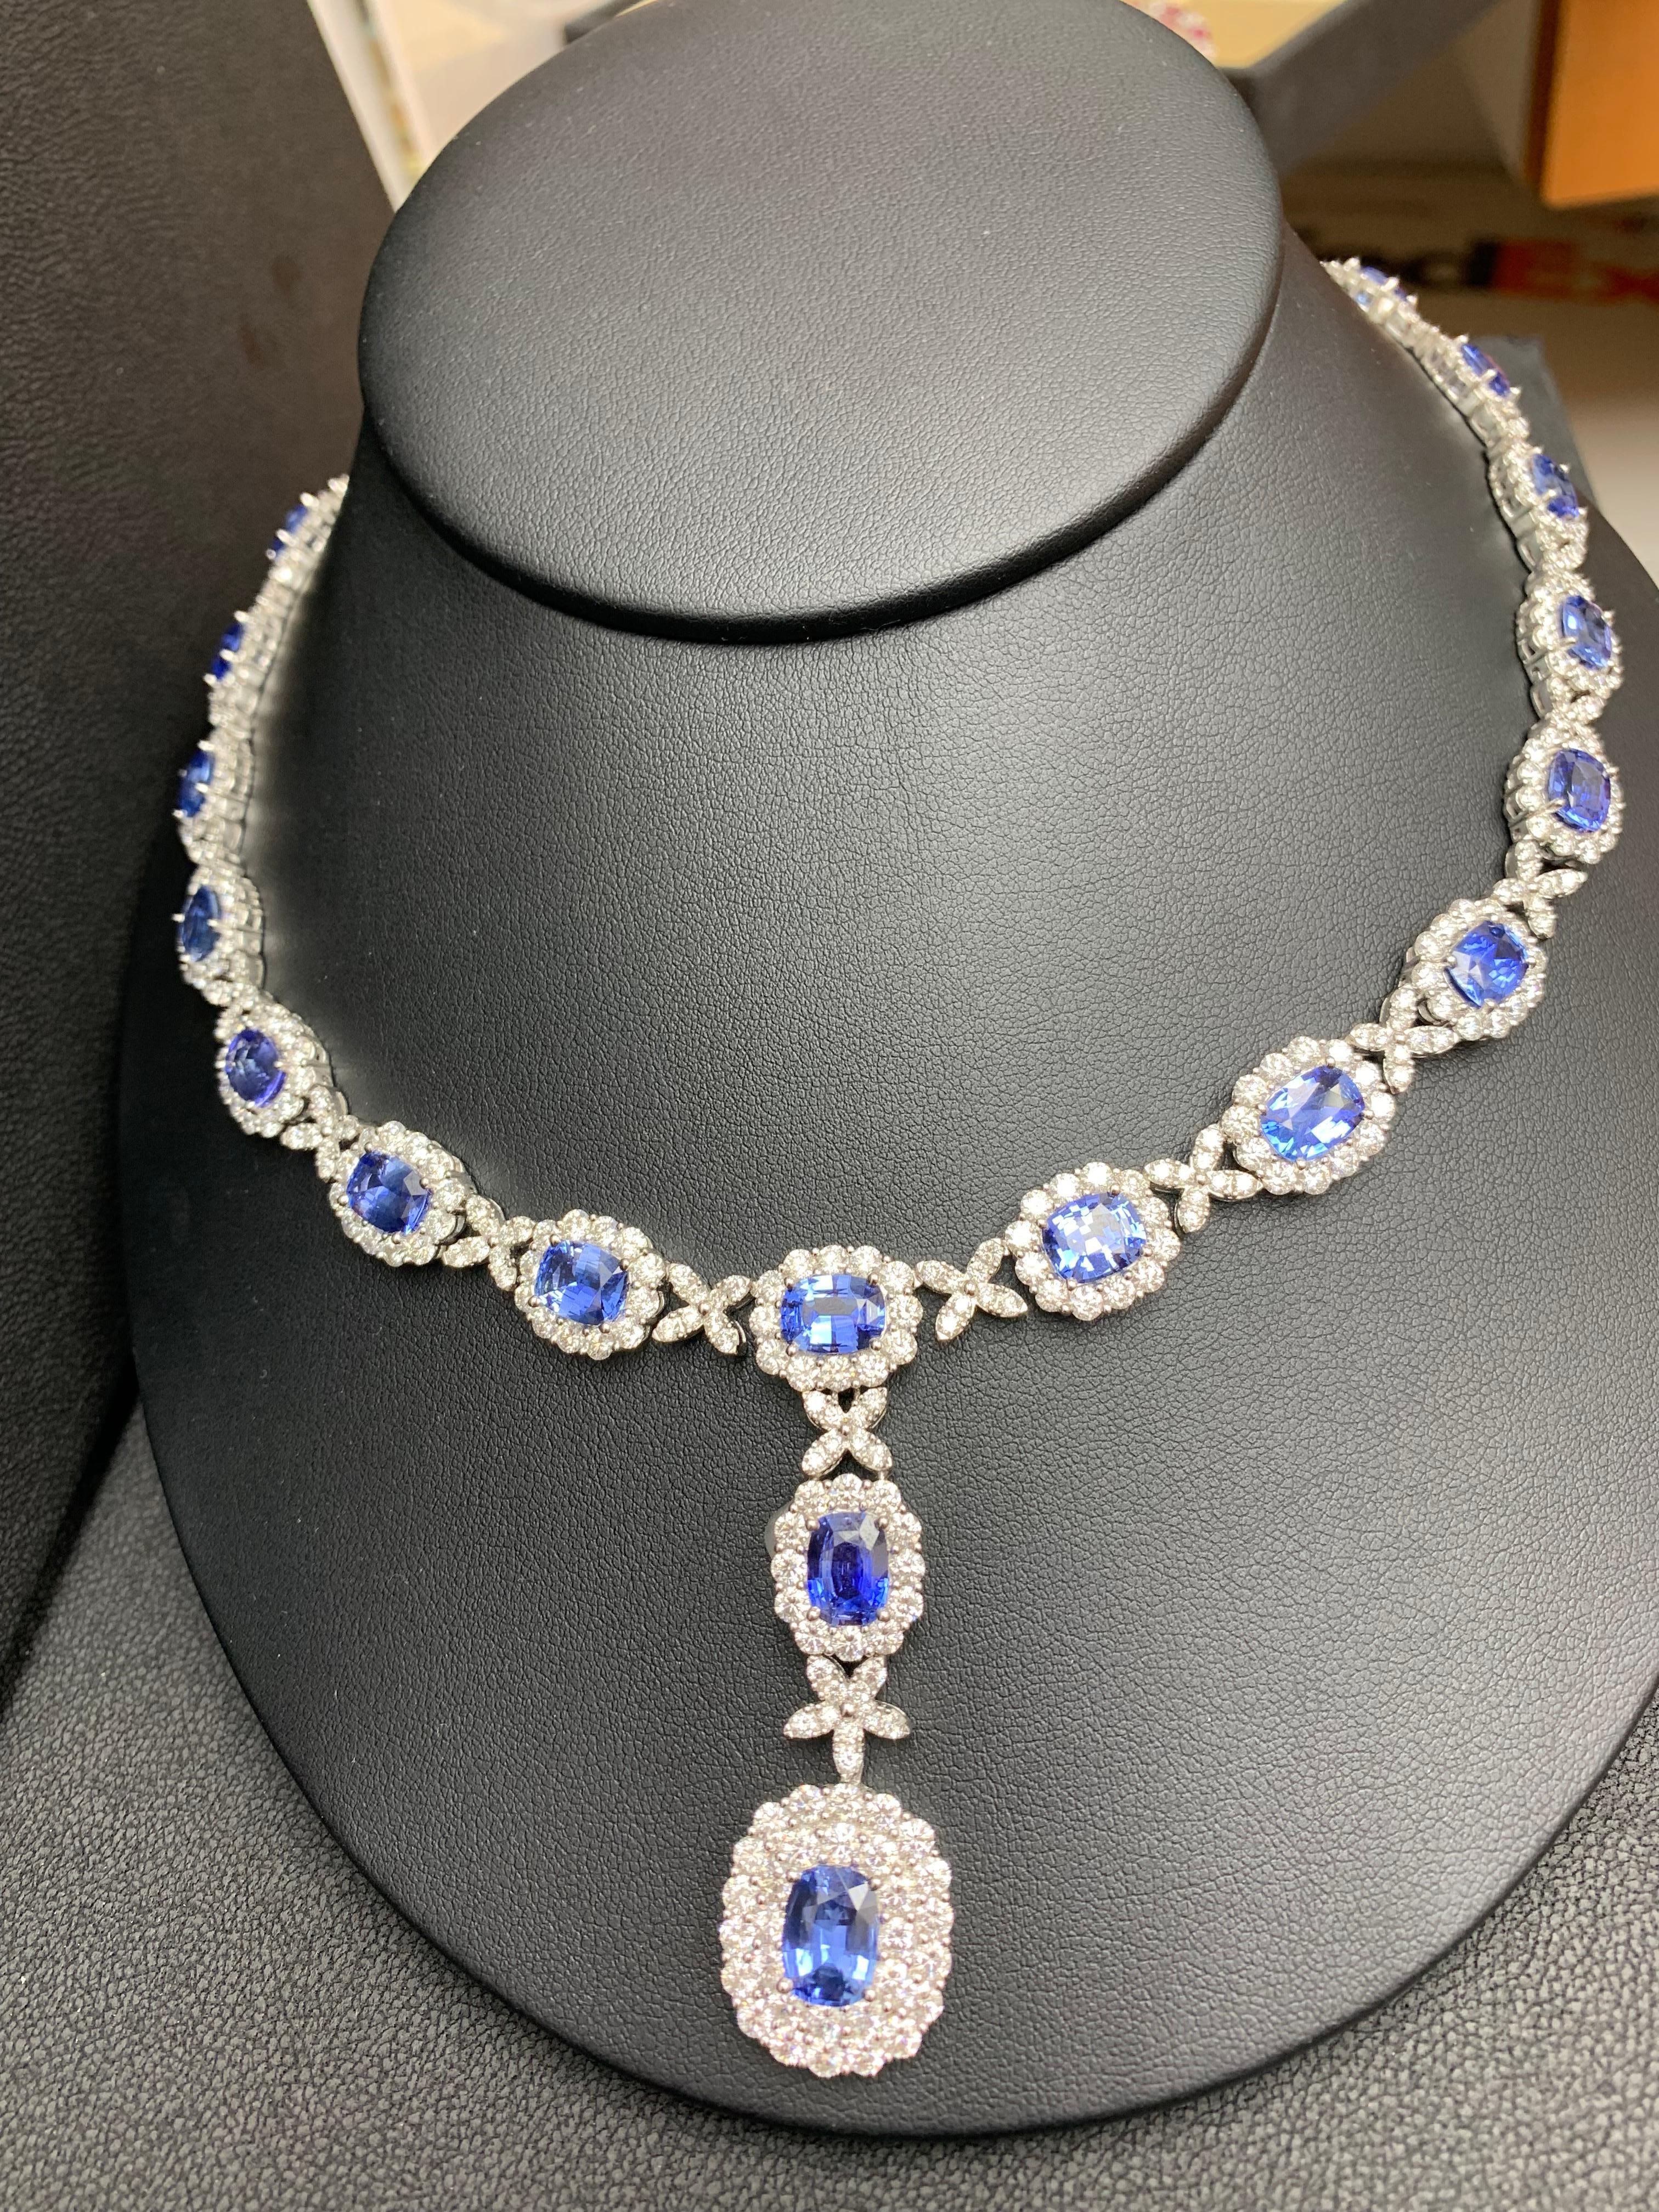 32.91 Carat Oval Cut Sapphire and Diamond Drop Necklace in 18K White Gold For Sale 13